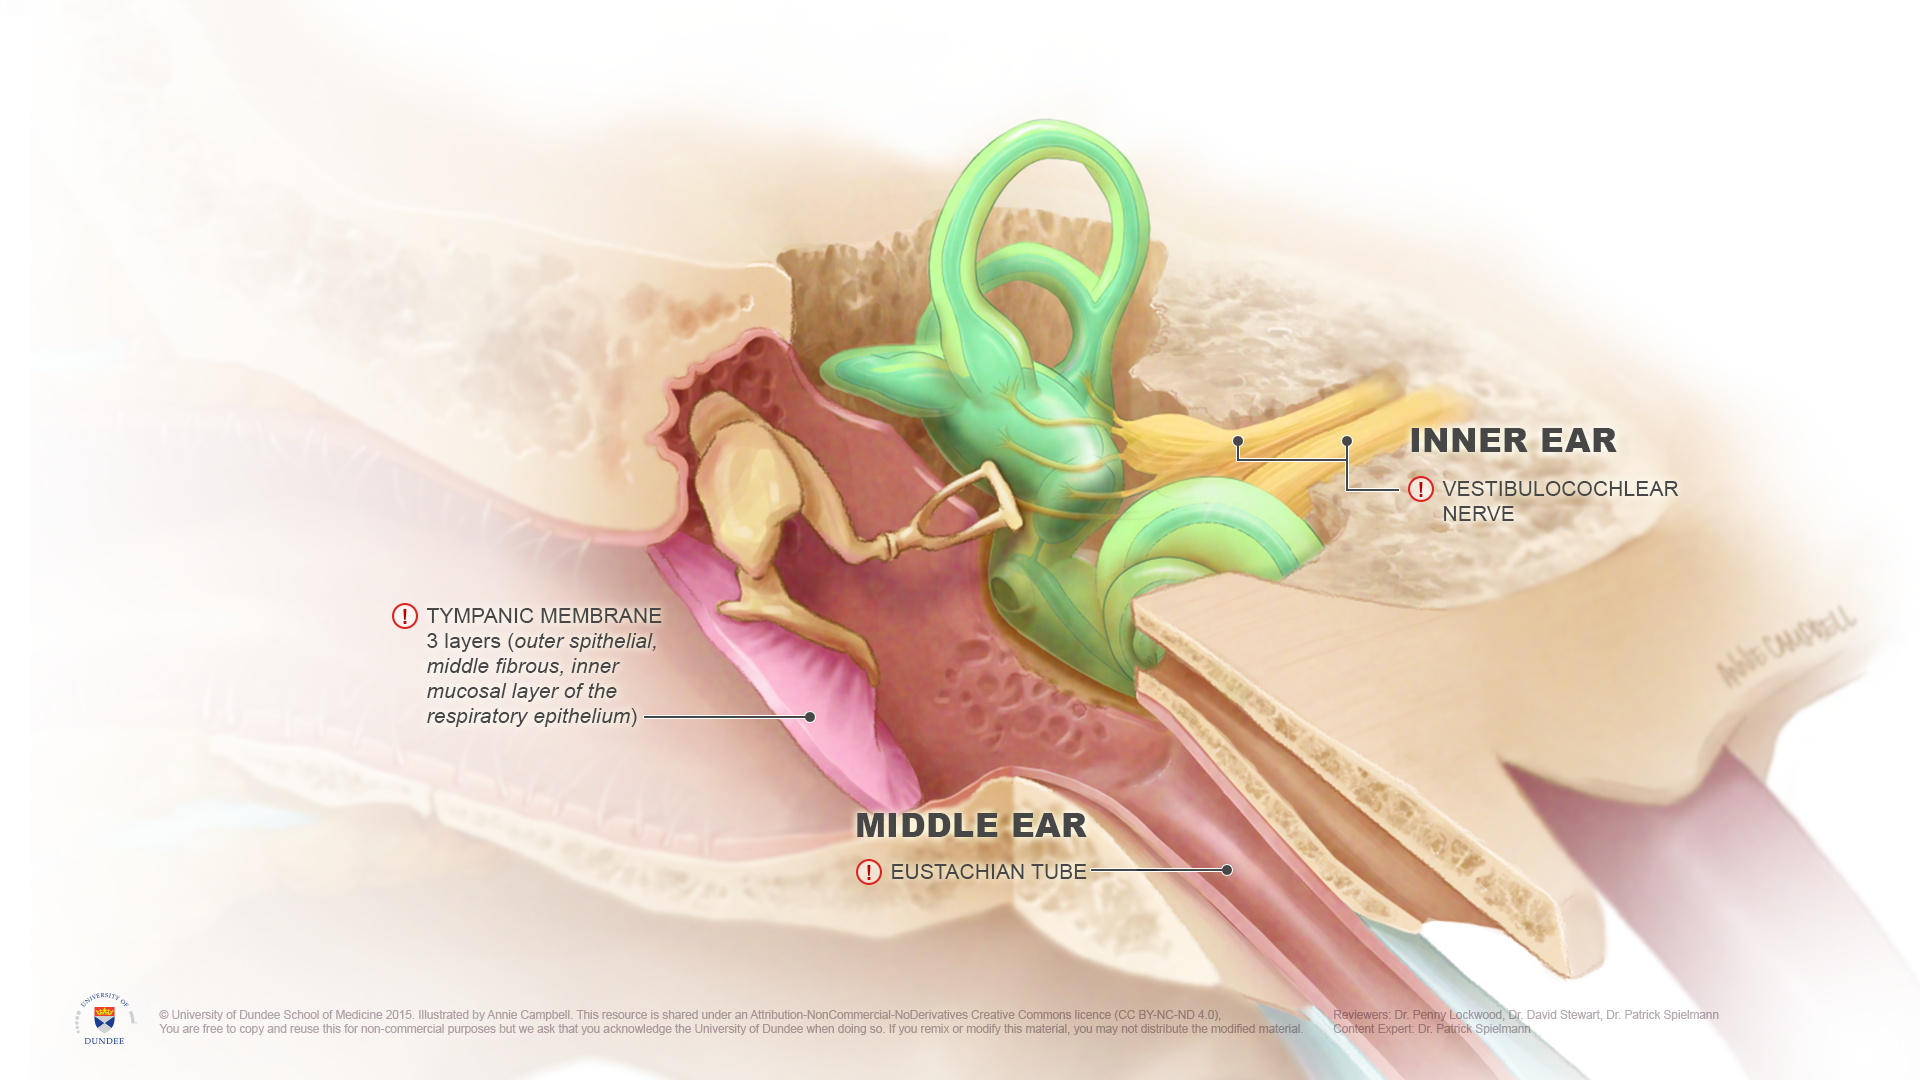 Illustration of the inner and middle ear, with eustachian tube and tympanic membrane highlighted